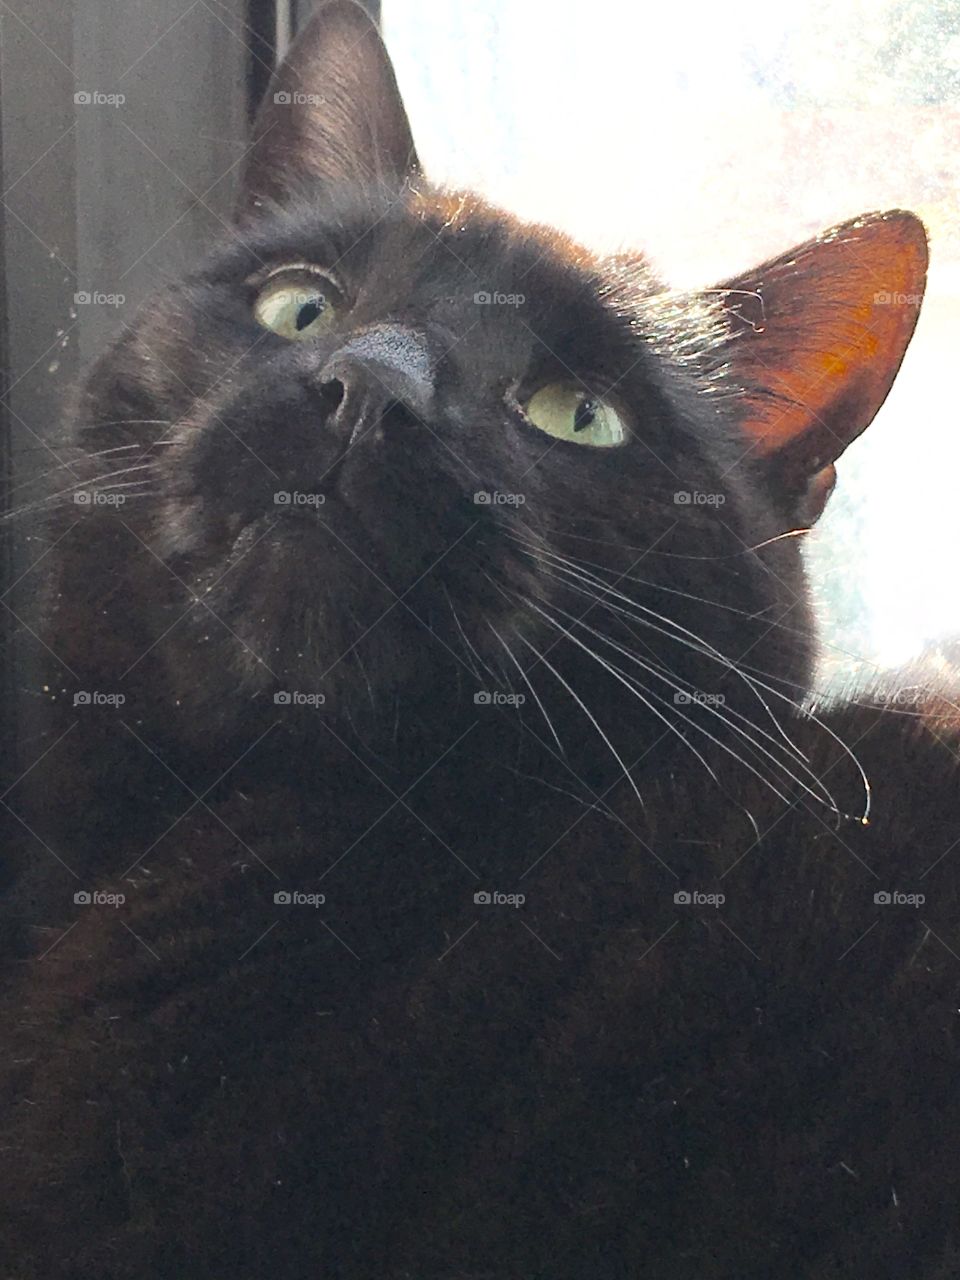 Black cat, looking up with green eyes. Nice close up photo showing white whiskers.